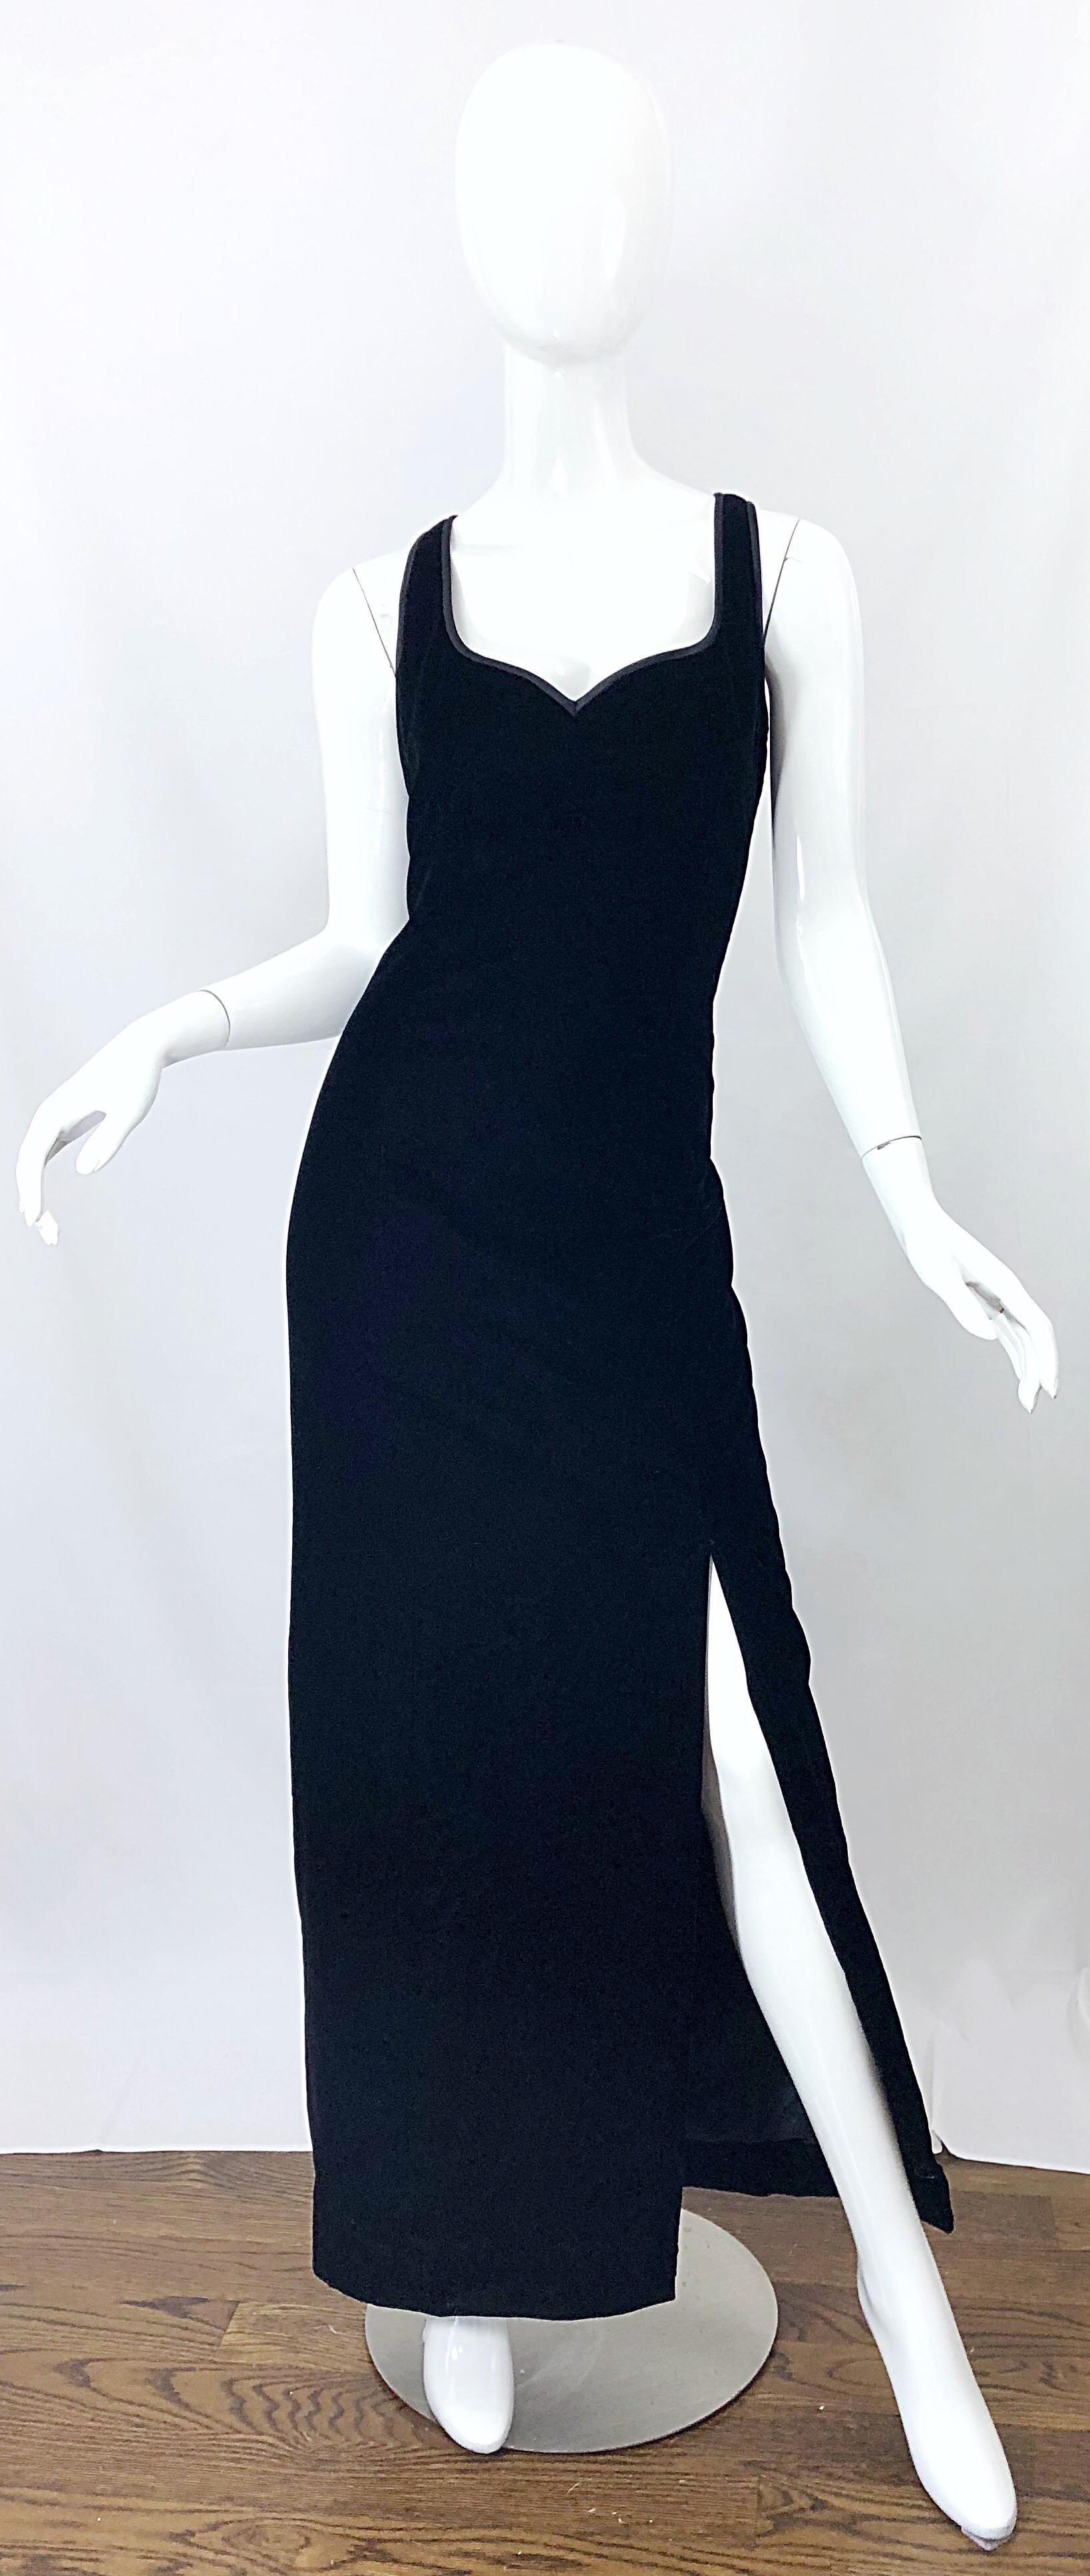 Beautiful vintage 90s BOB MACKIE black velvet sleeveless evening gown! Features a flattering satin lined sweetheart neckline and a thigh high slit that reveals just the right amount of leg. Hidden zipper up the back with hook-and-eye closure. The